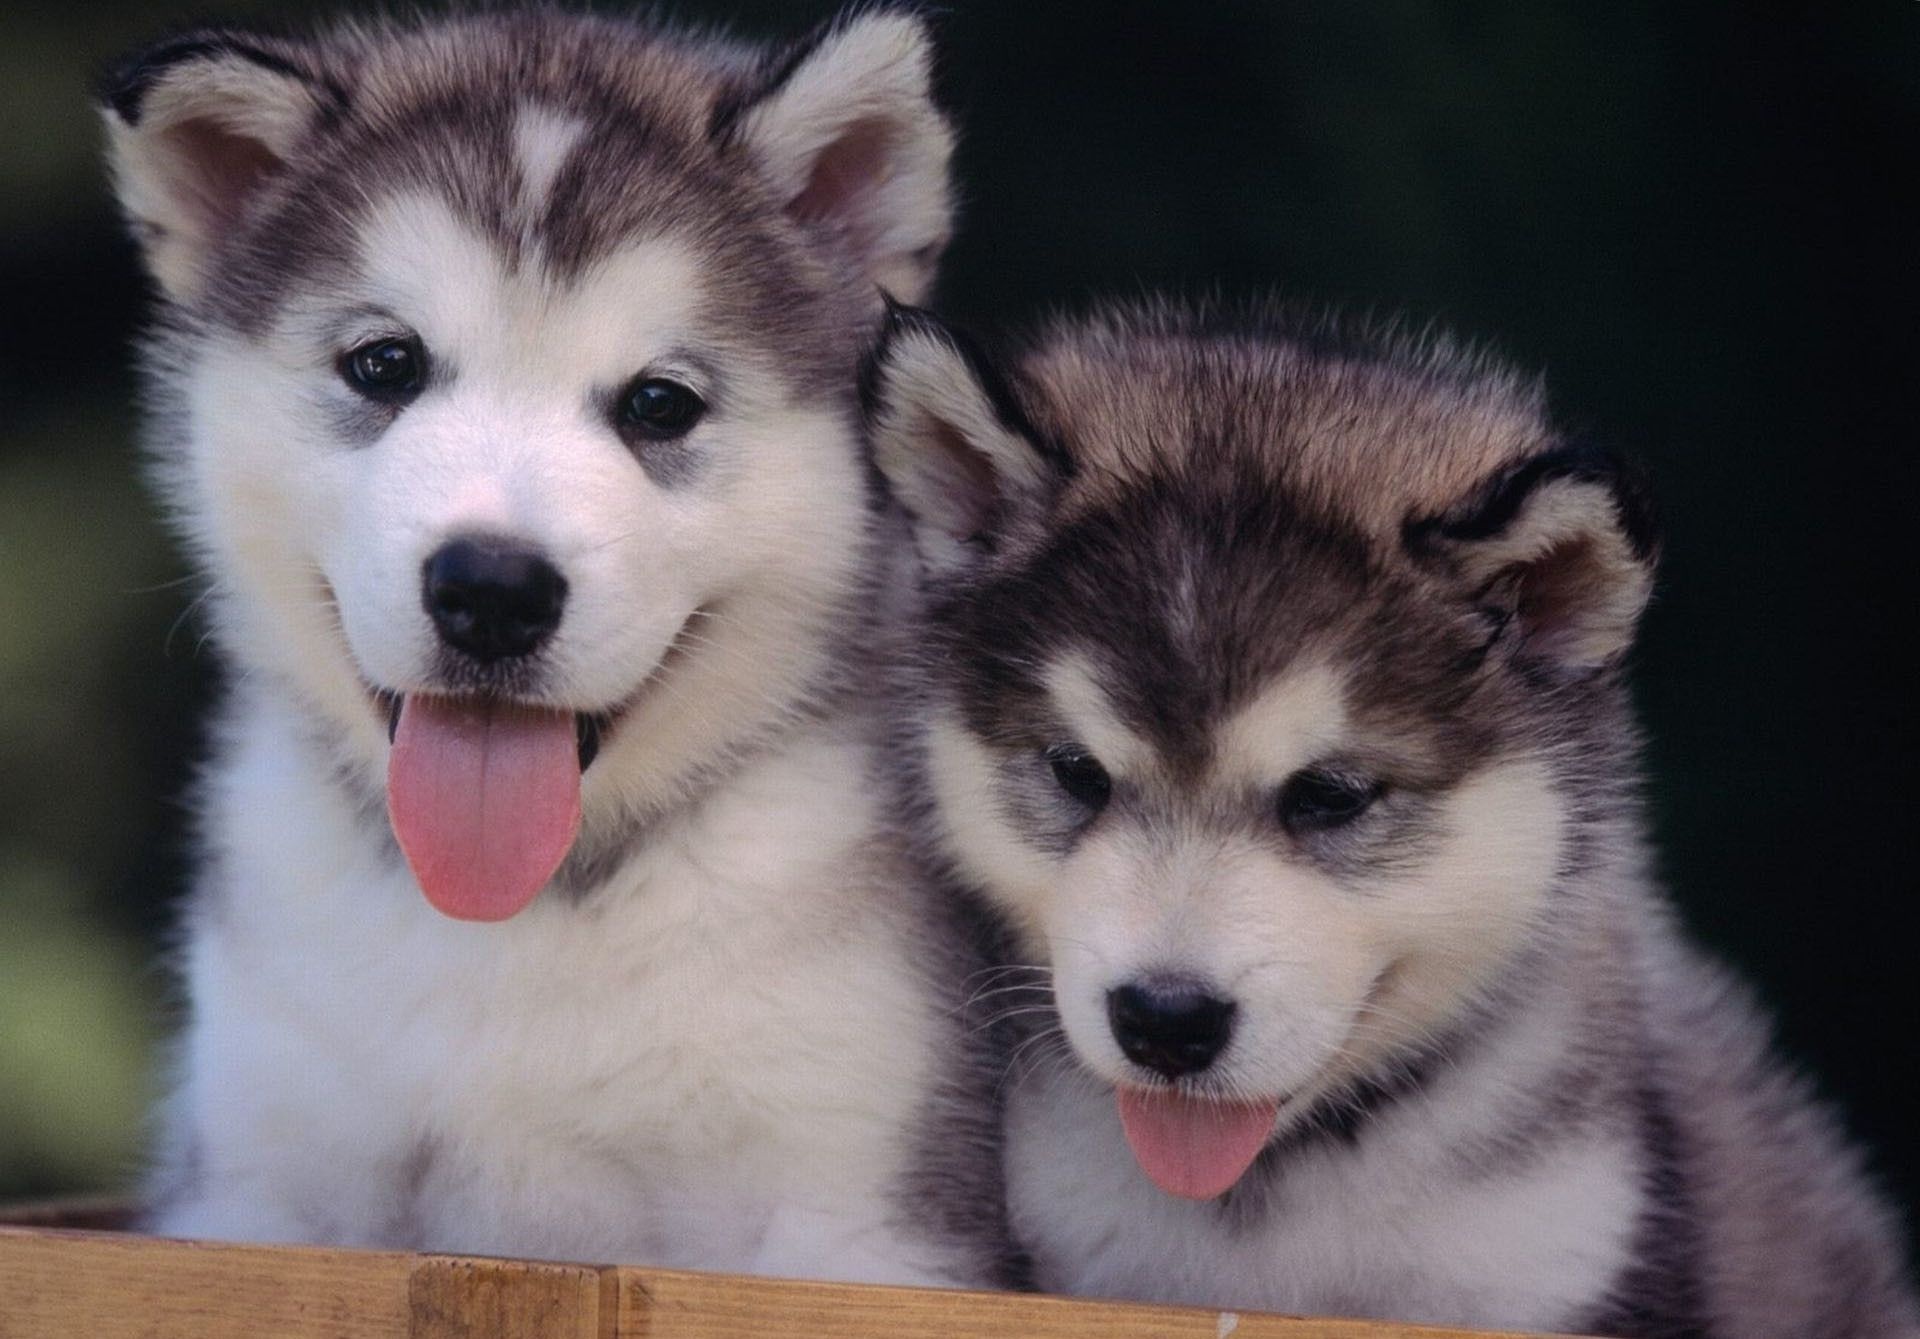 Husky puppies wallpapers, Charming images, Cute puppies, Playful canines, 1920x1340 HD Desktop